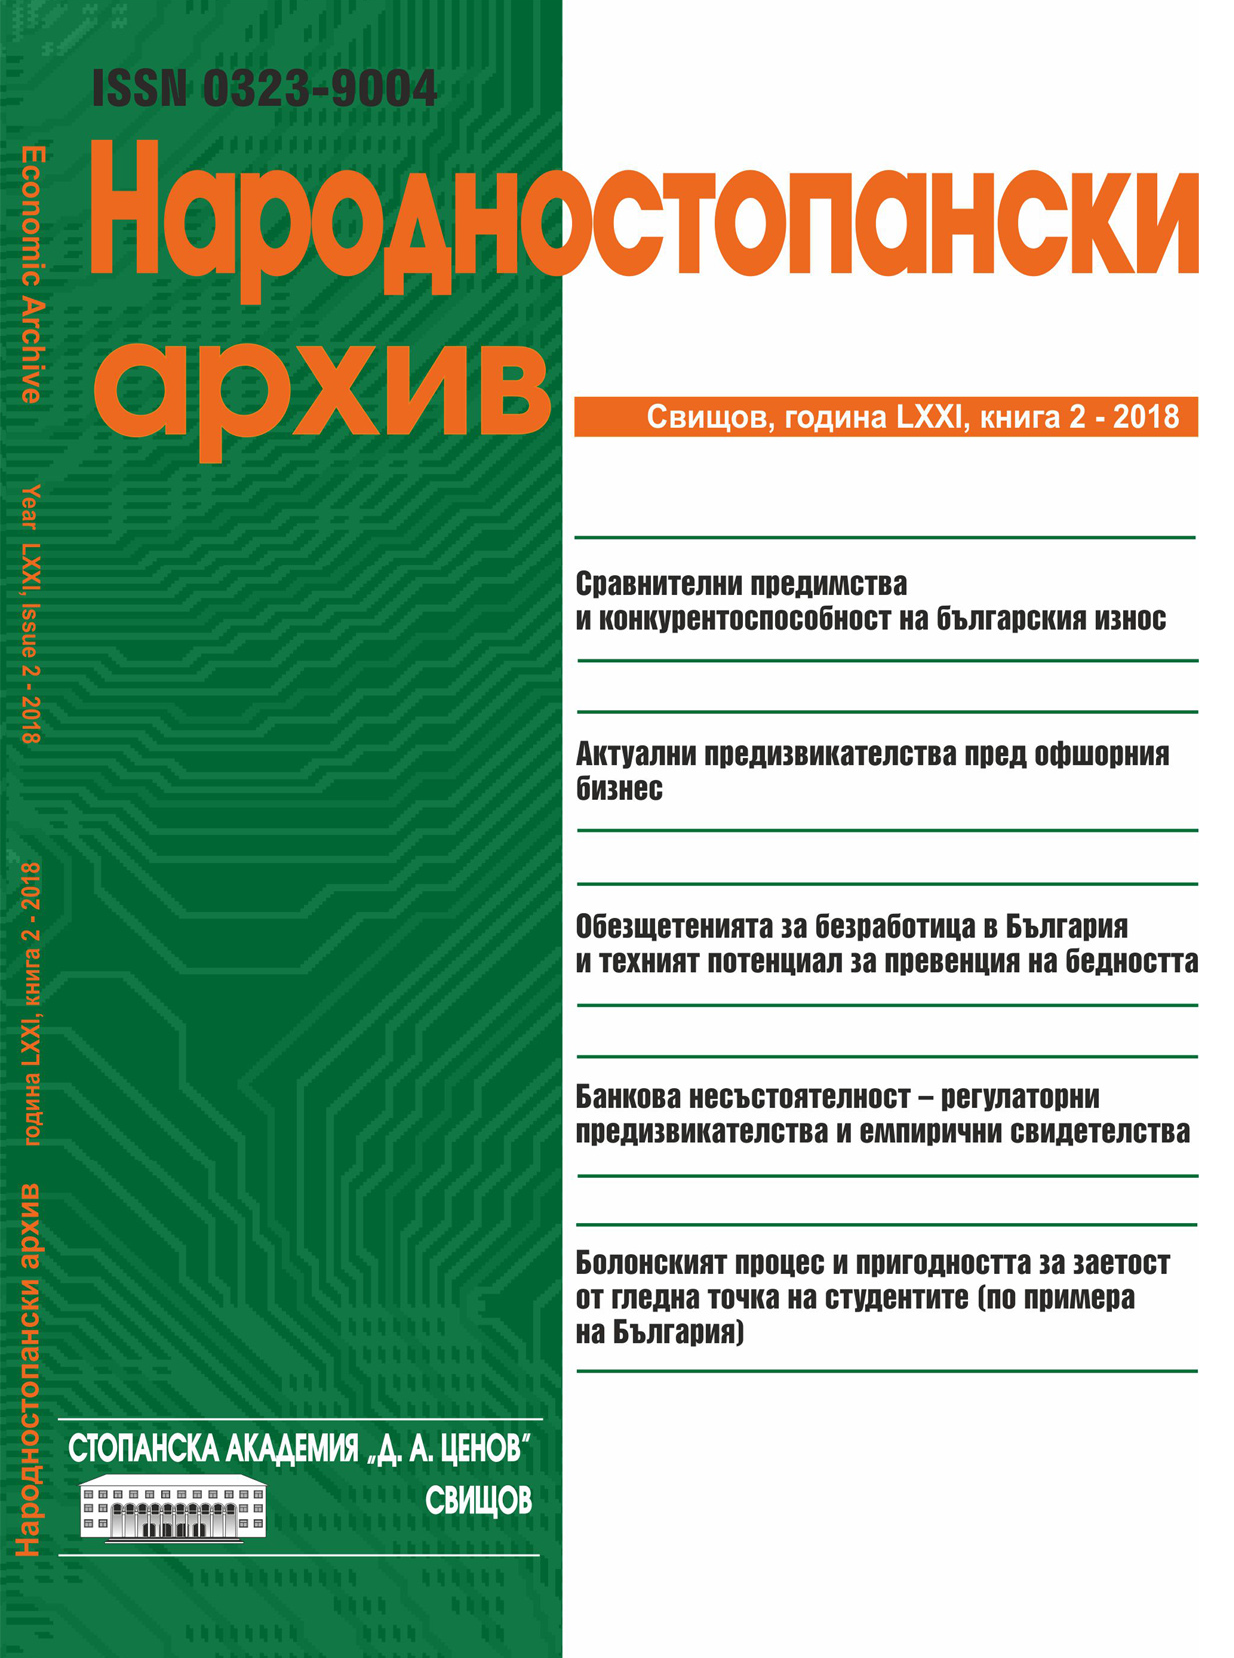 COMPARATIVE ADVANTAGES AND COMPETITIVENESS OF BULGARIAN EXPORTS Cover Image